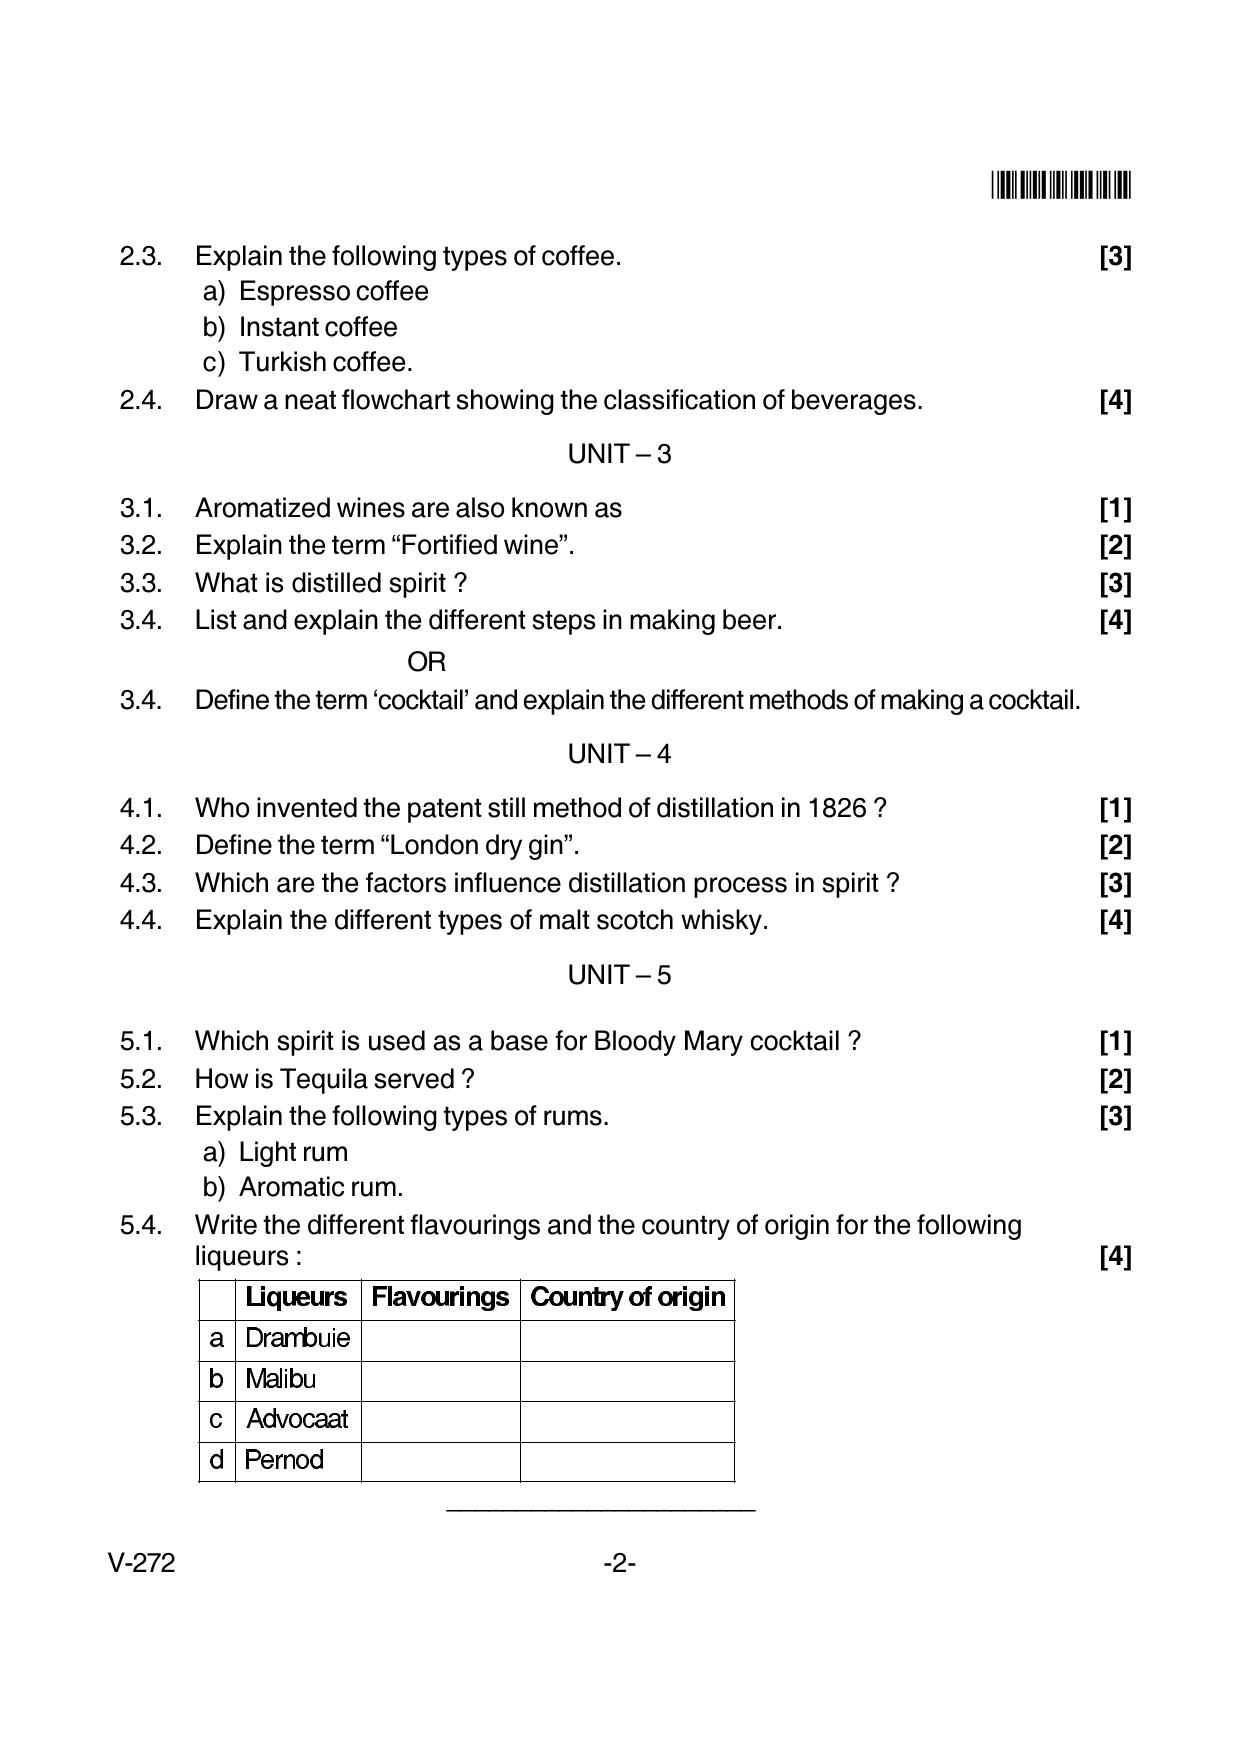 Goa Board Class 12 Food & Beverage Service  Voc 272 New Pattern (March 2018) Question Paper - Page 2